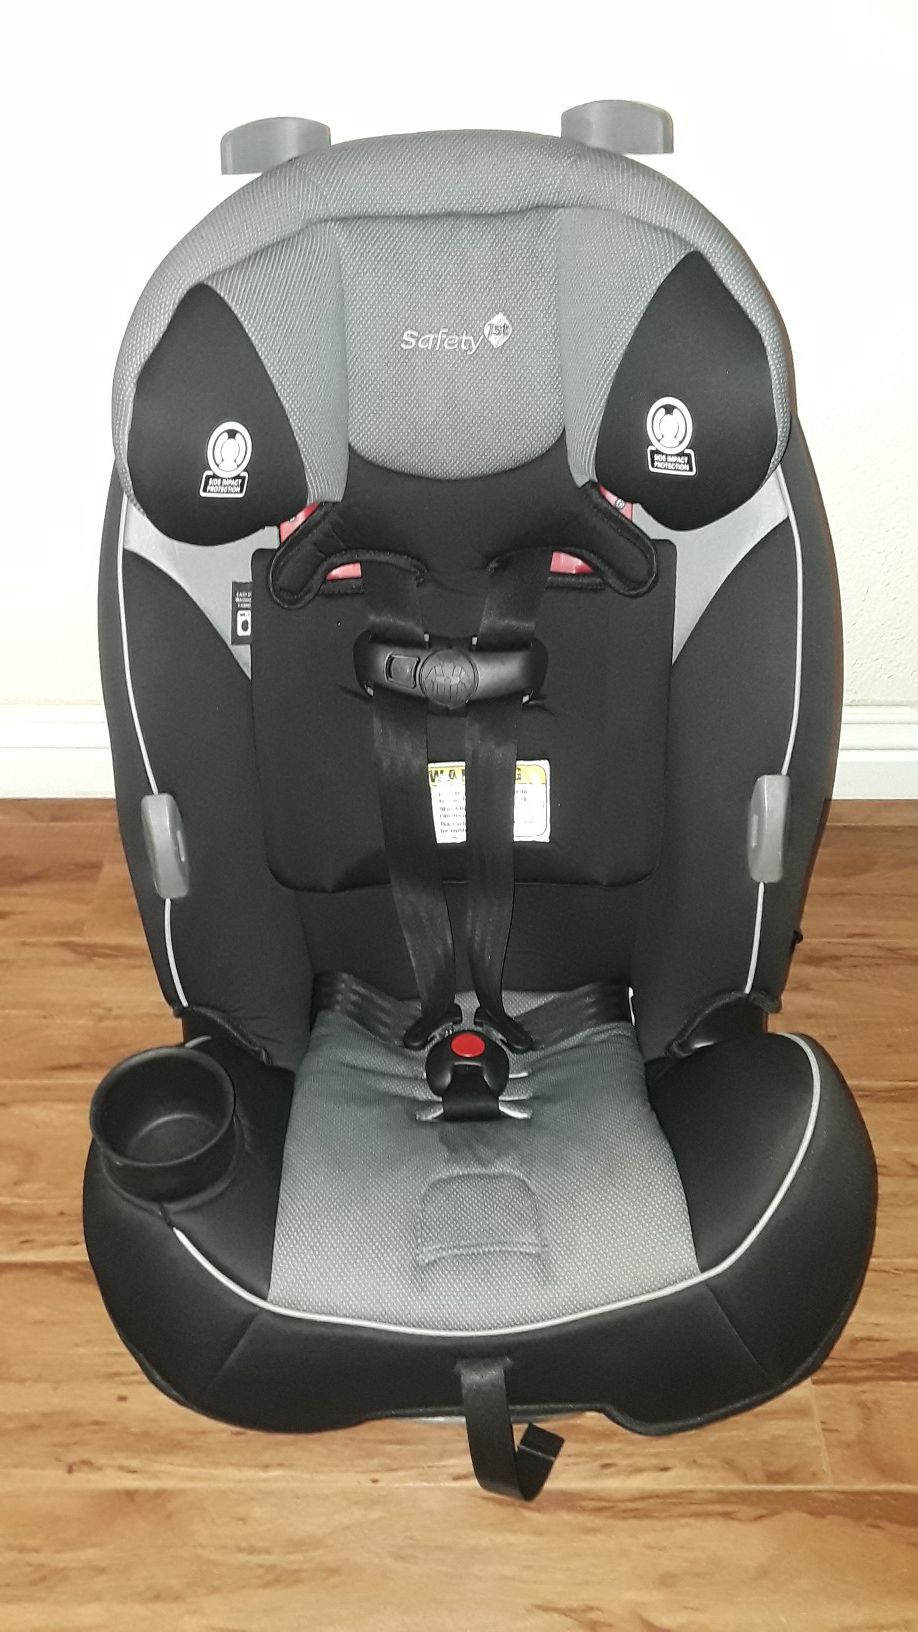 Convertible car seat and booster seat Safety 1st, like new.